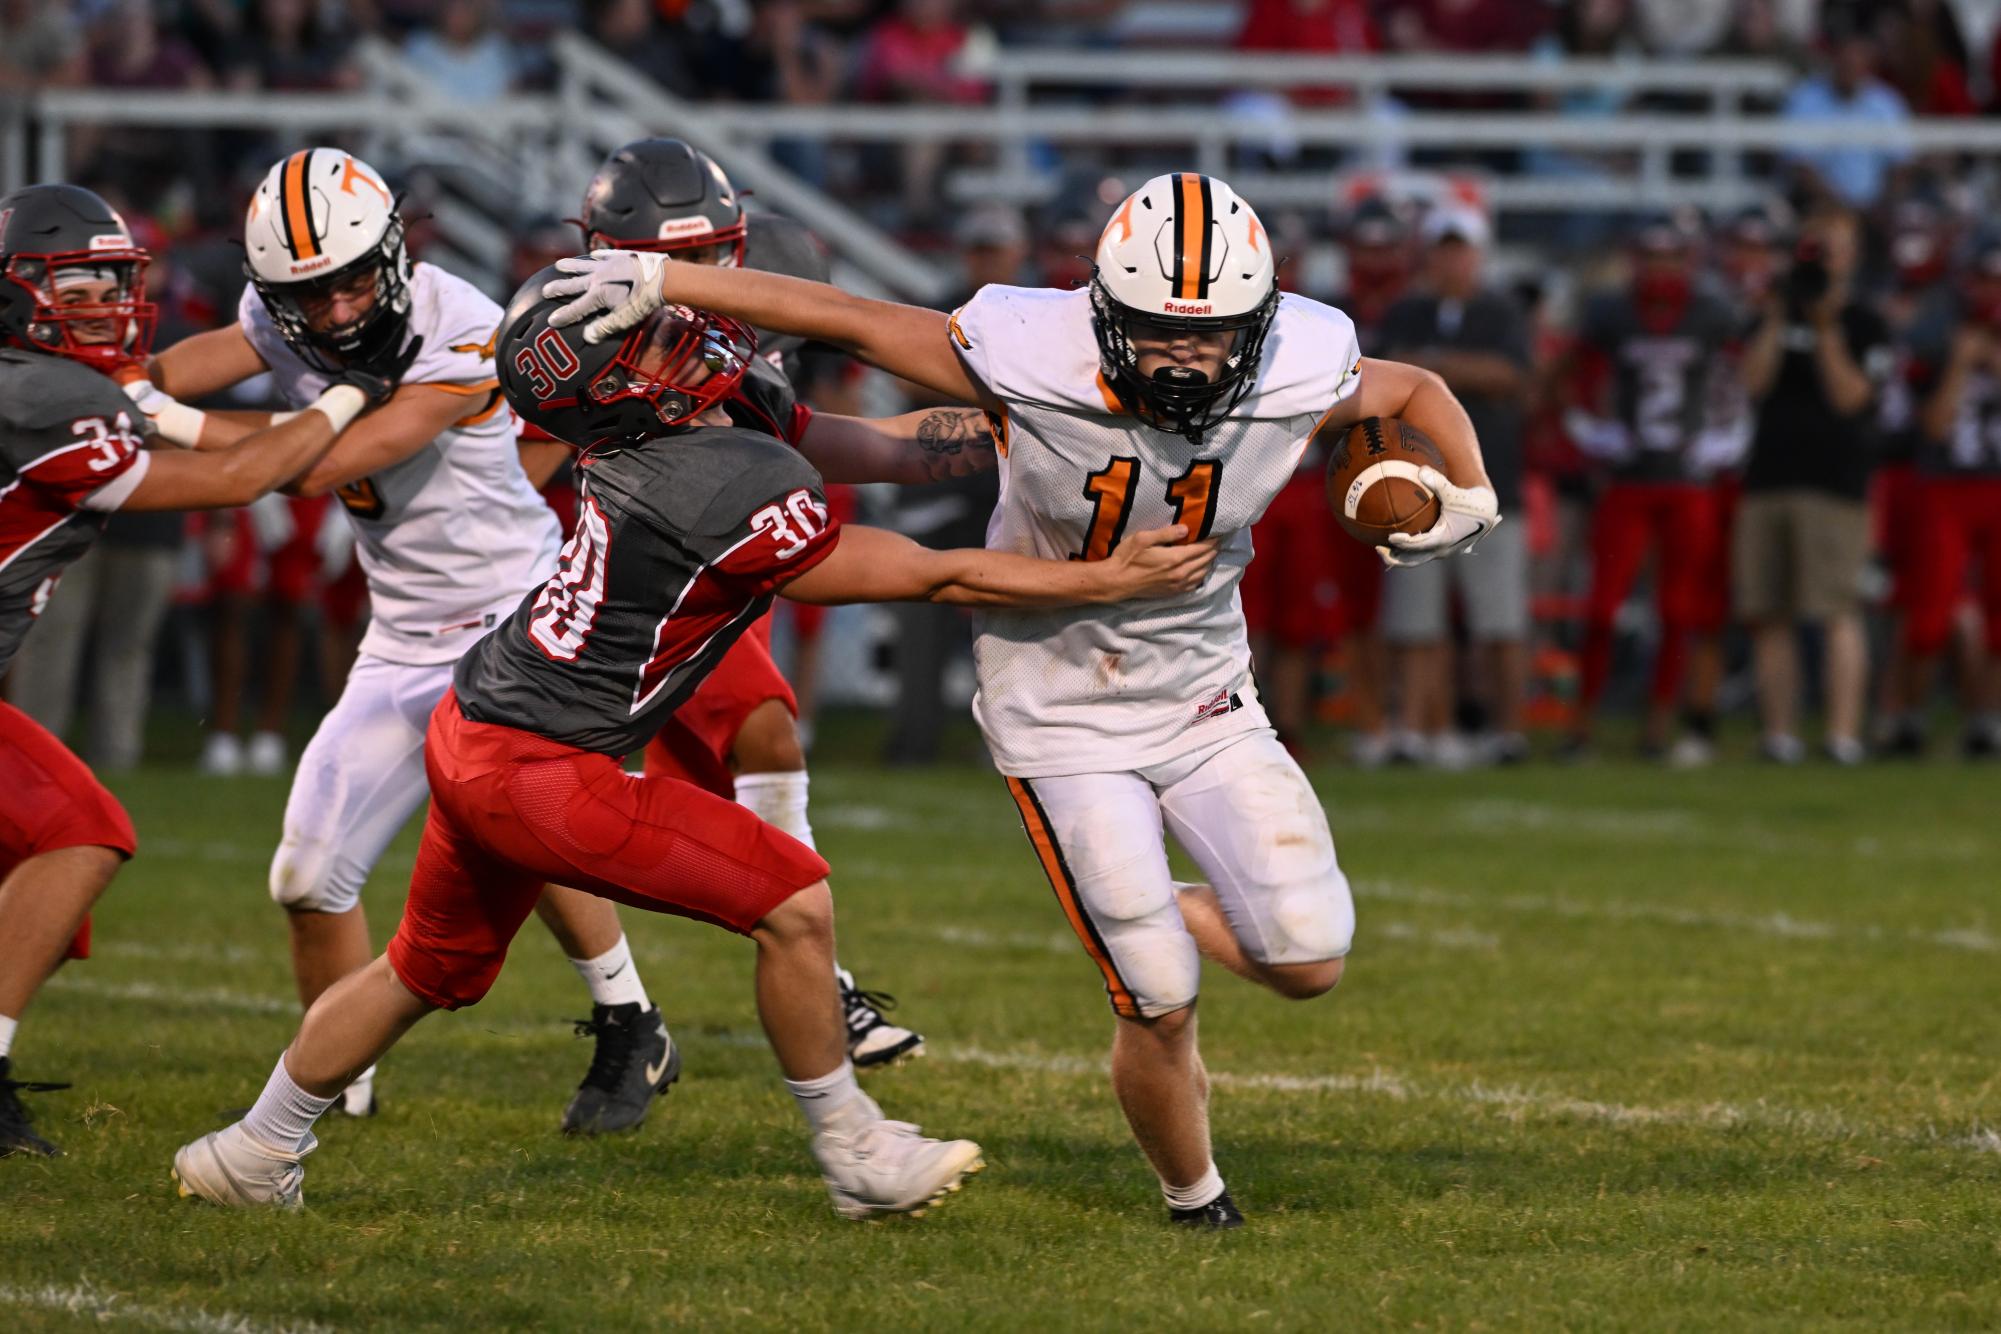 Seth Hoover Breaks a Tackle, First Place, Sports Photo